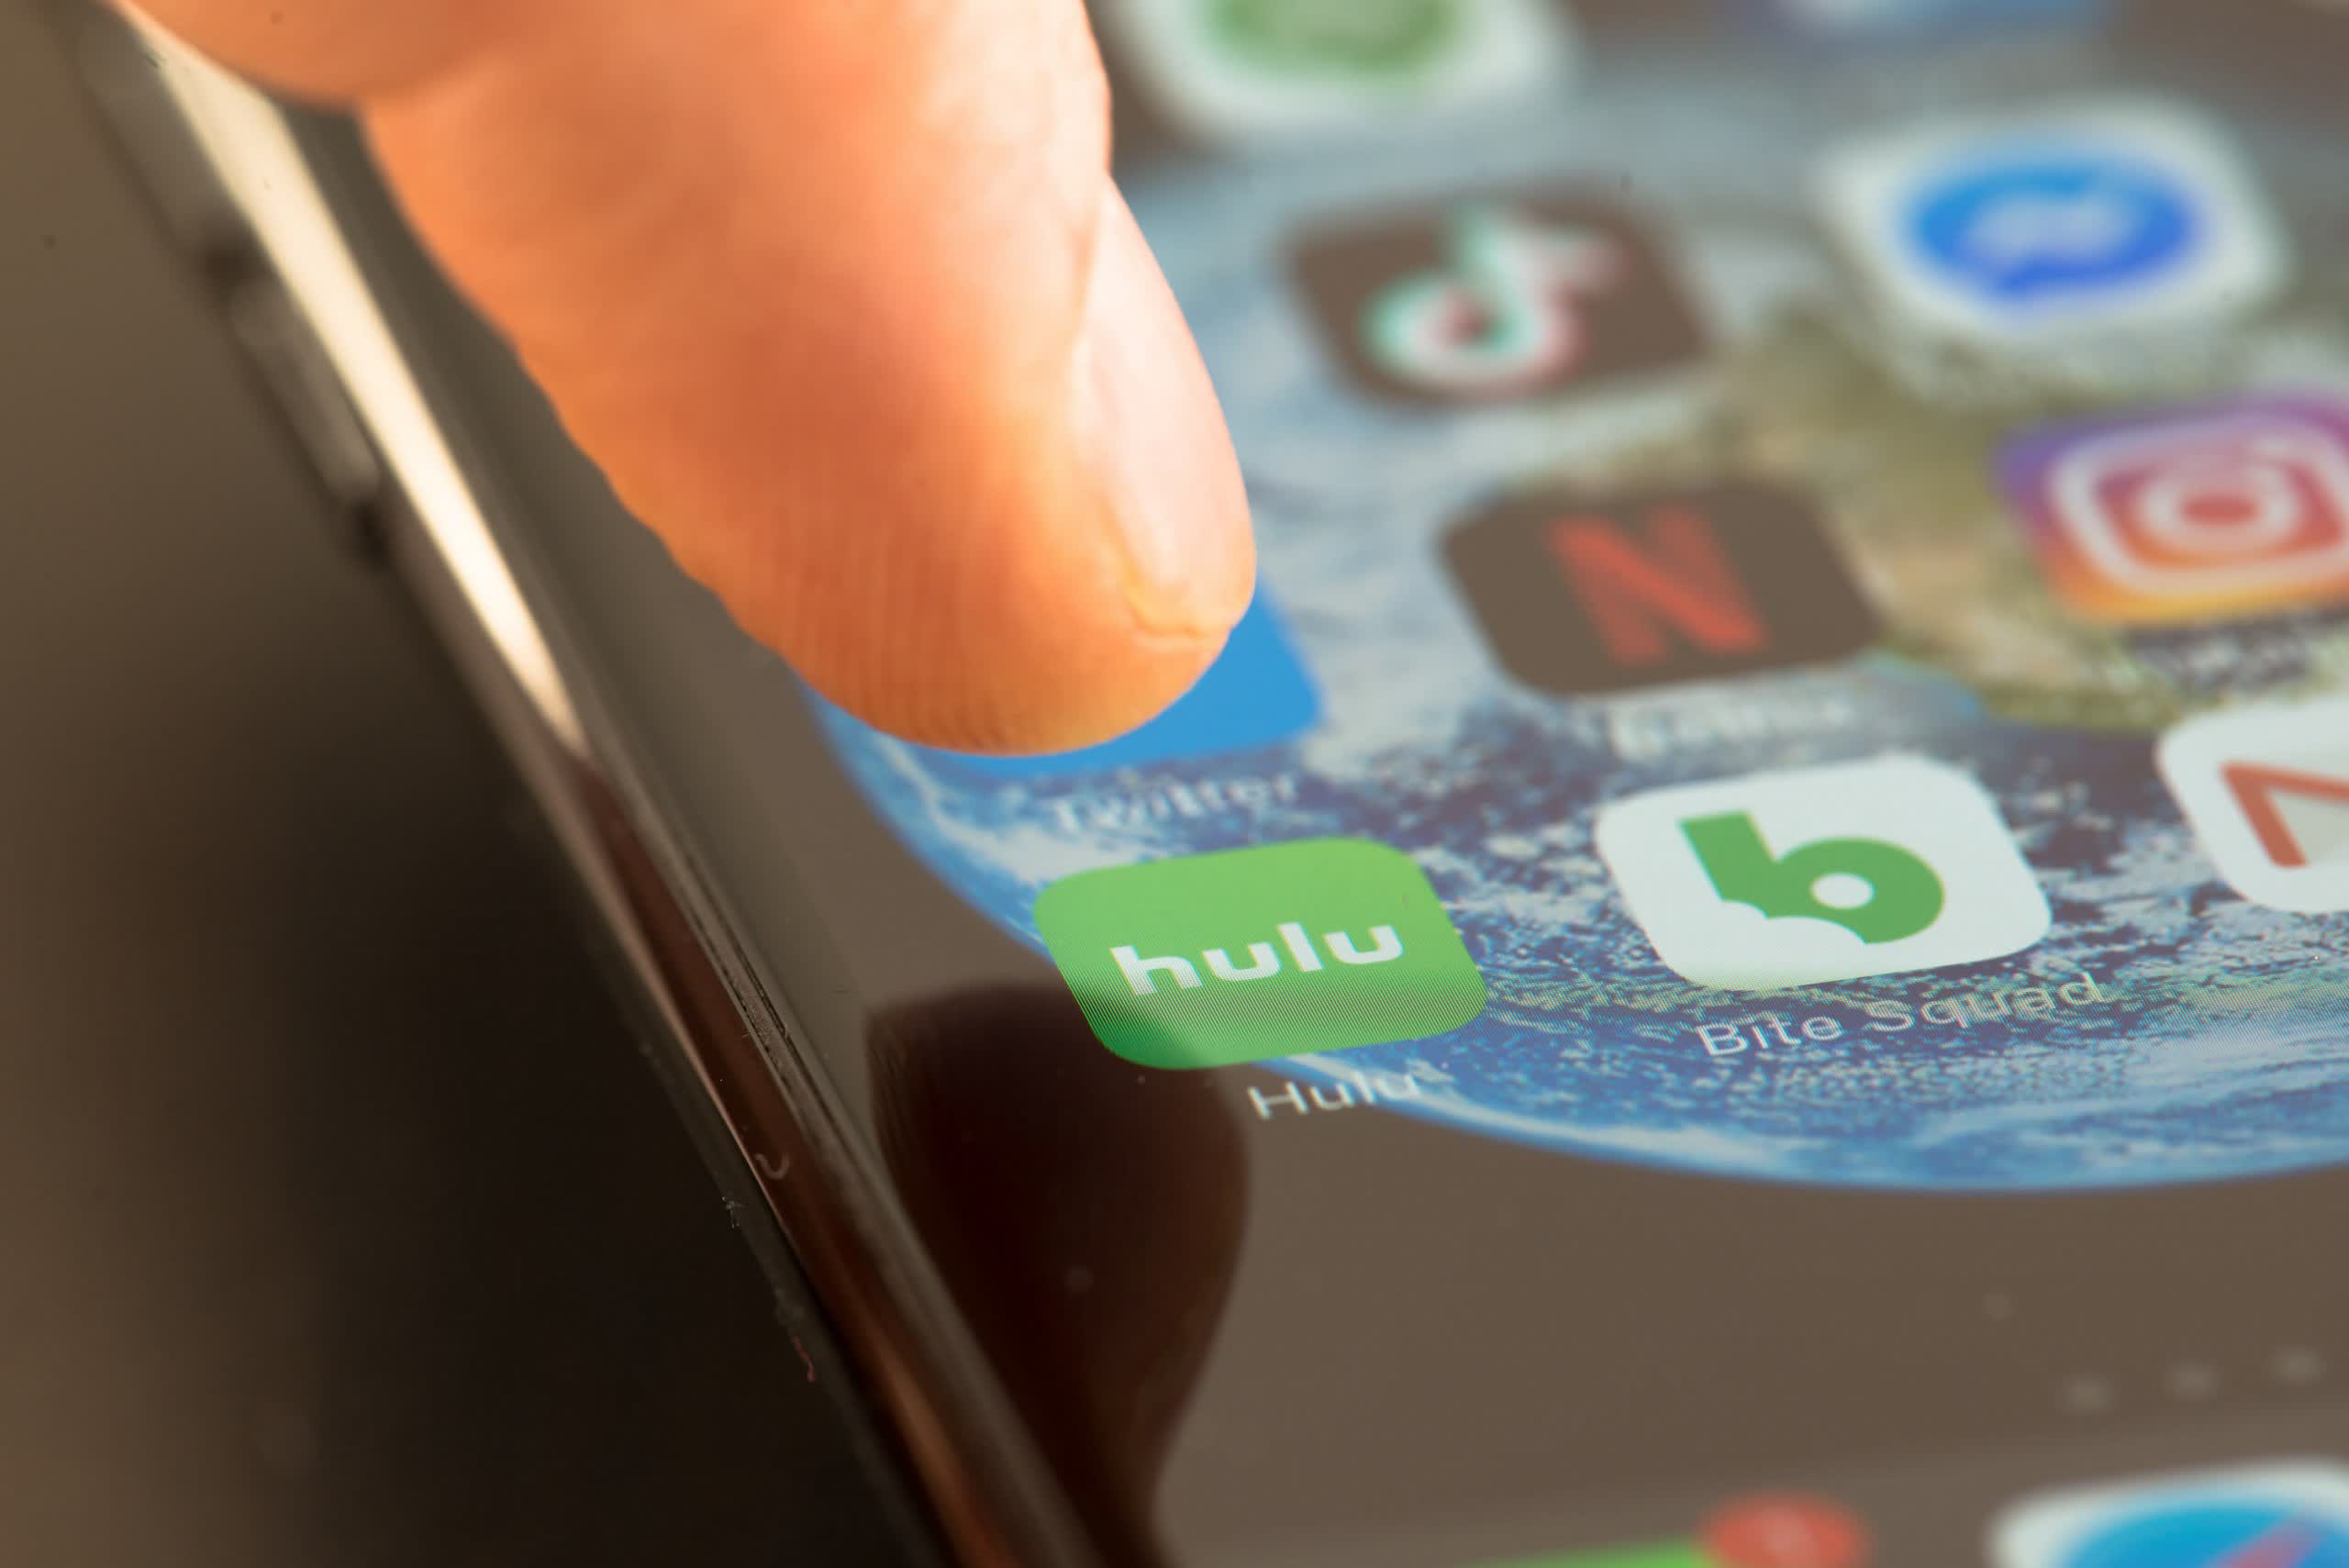 Apple took API tools away from Hulu for upgrading subscriptions outside the App Store